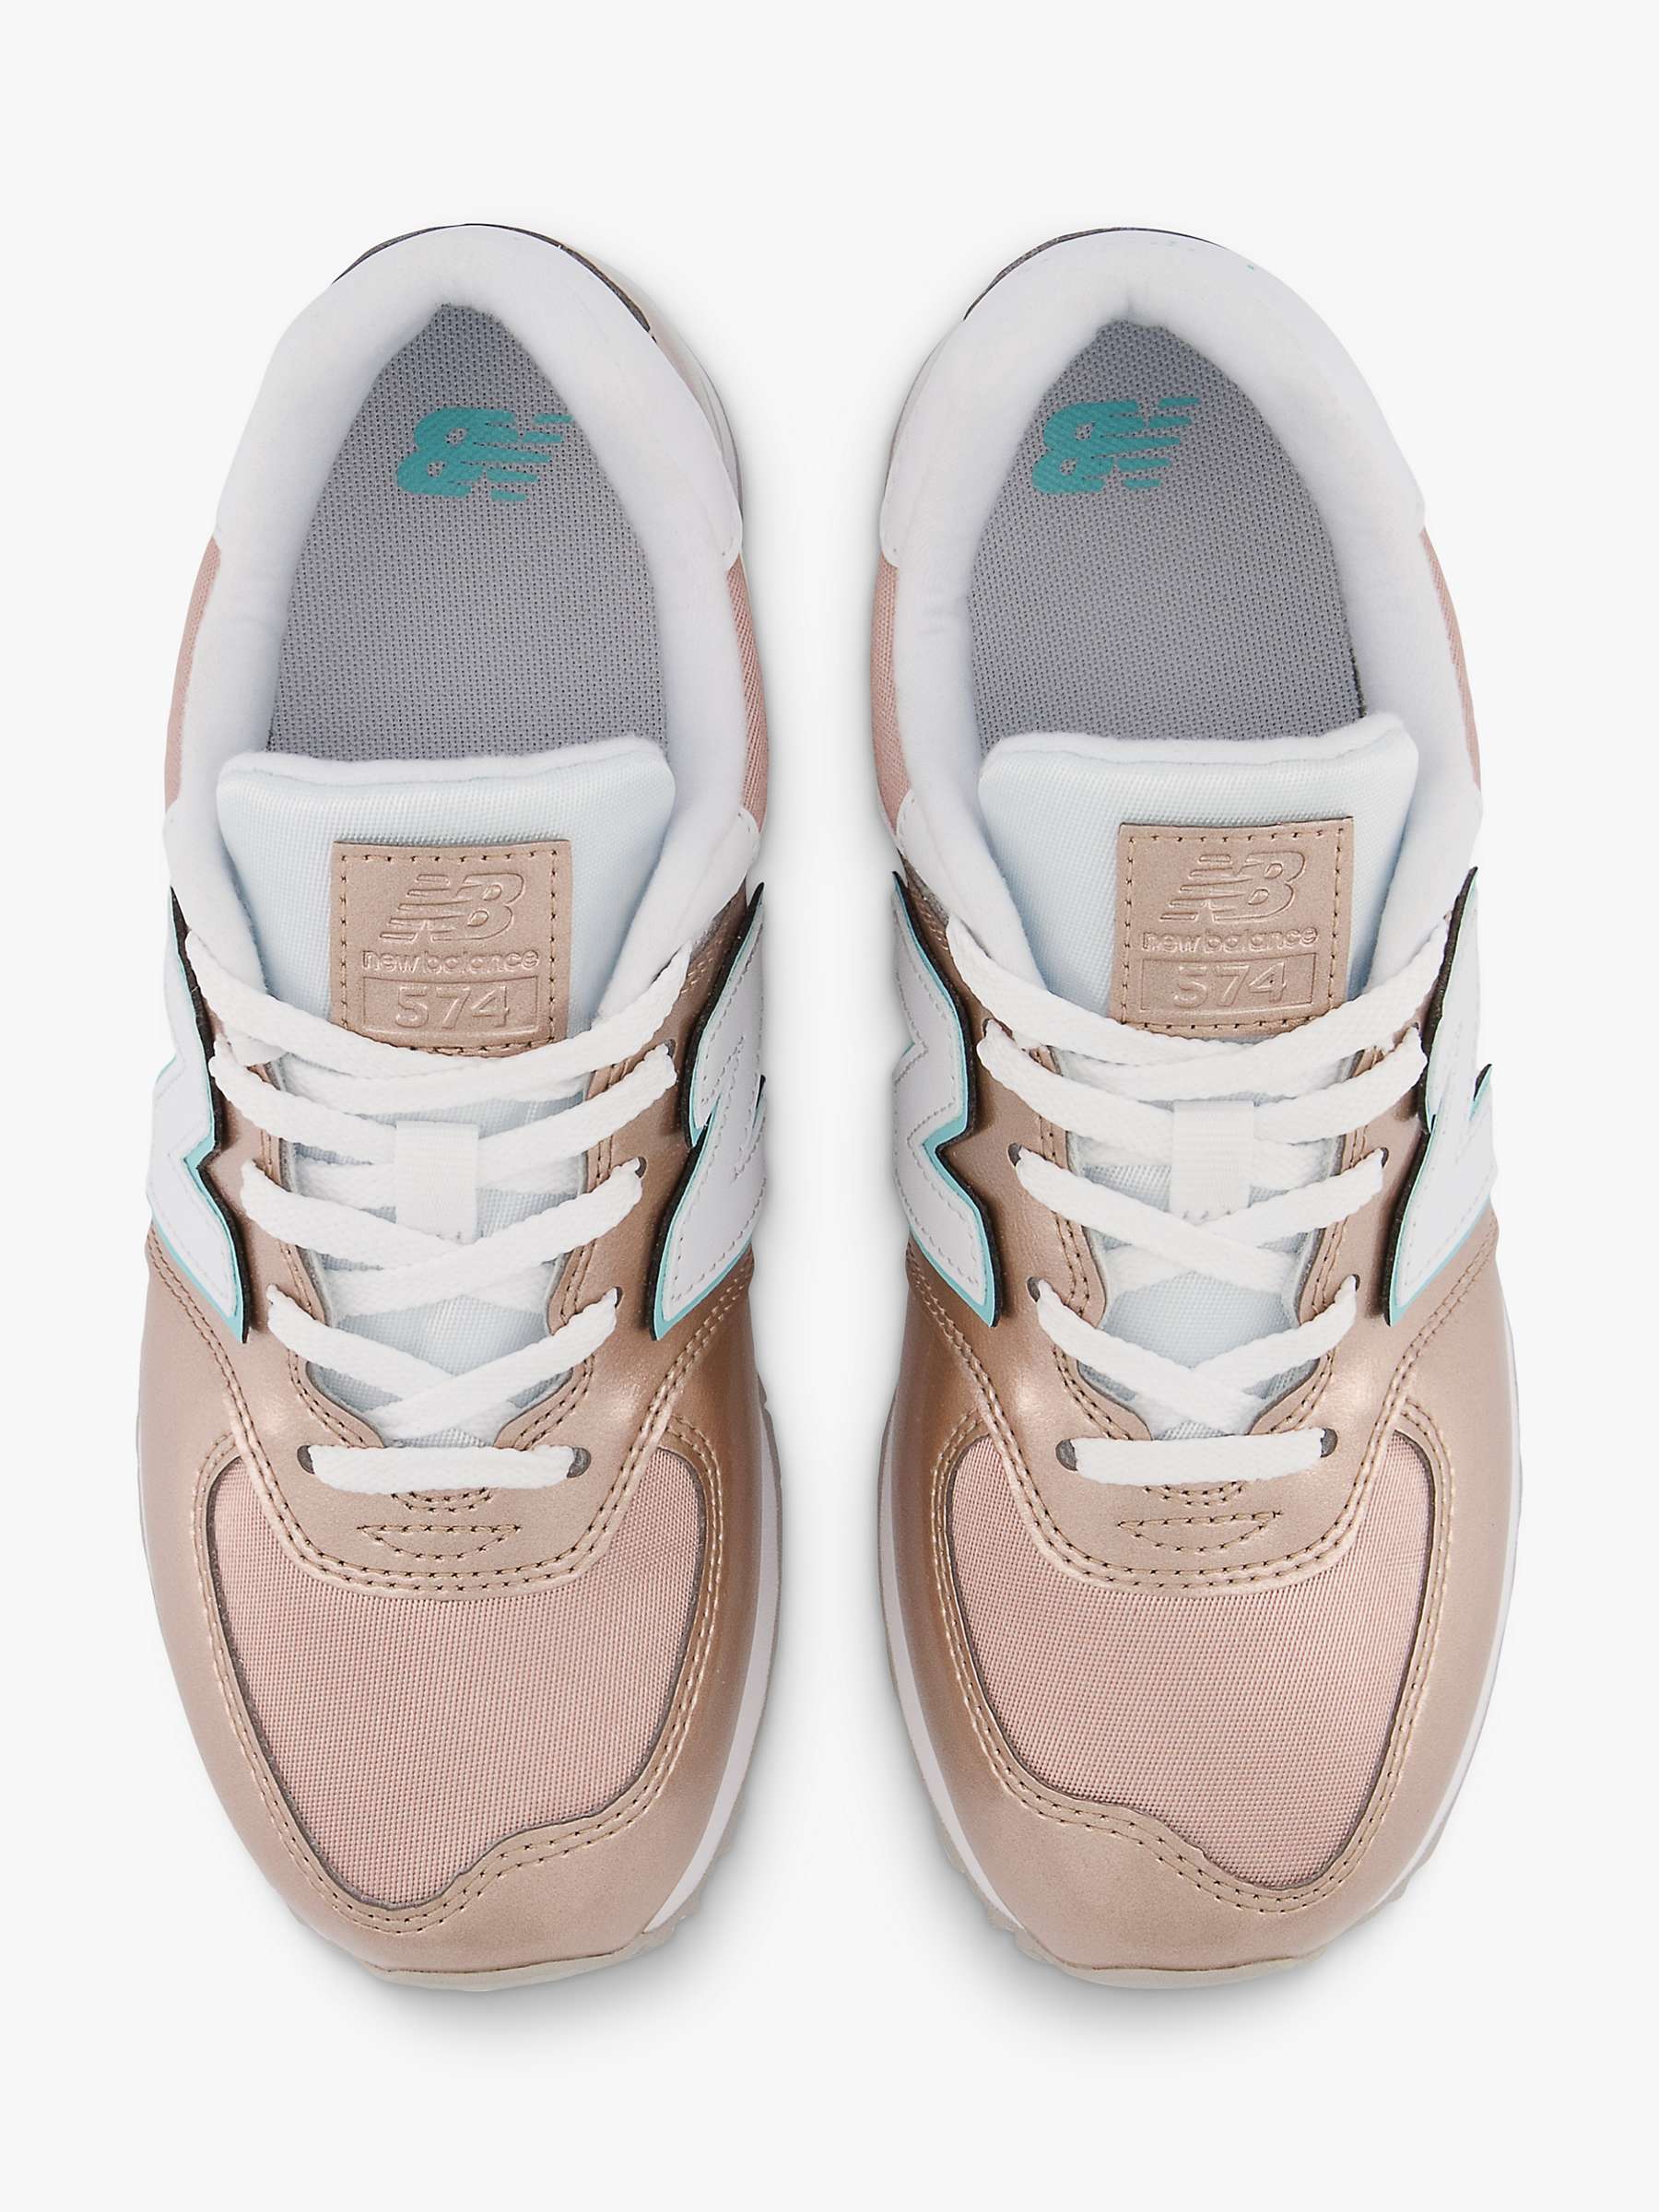 New Balance Kids' 574 Lace-Up Trainers, Rose Gold/Surf at John Lewis ...